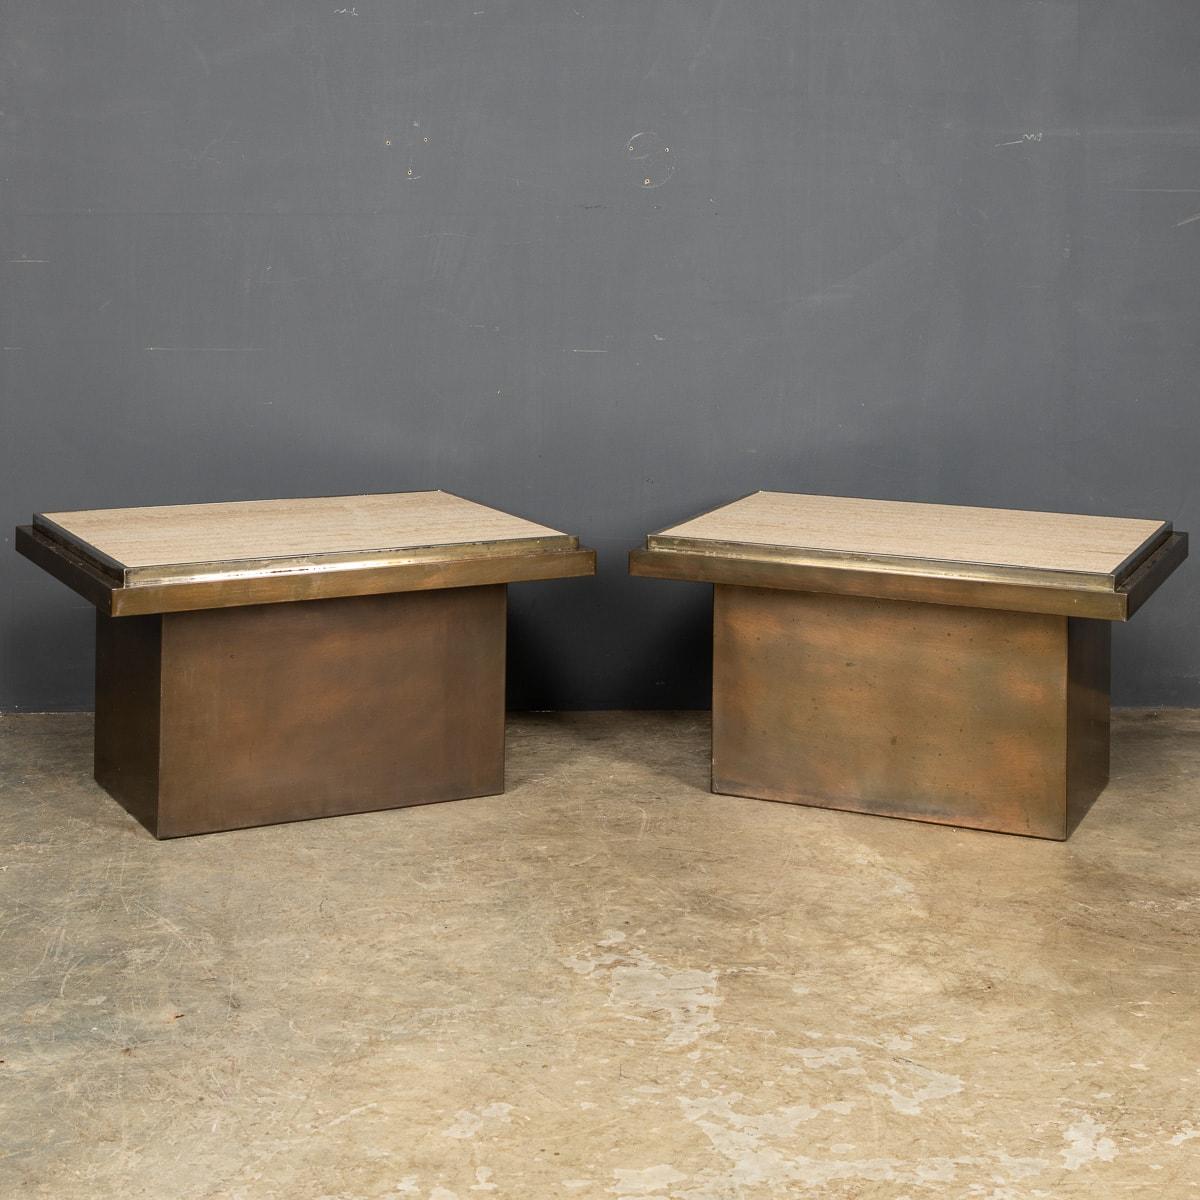 A stunning pair of end tables with Italian travertine marble tops framed in chrome on a bronze base made to the highest standard by Belgo Chrome.

CONDITION
In great condition - no damage.

SIZE
Height: 41cm
Width: 75cm
Depth: 55cm